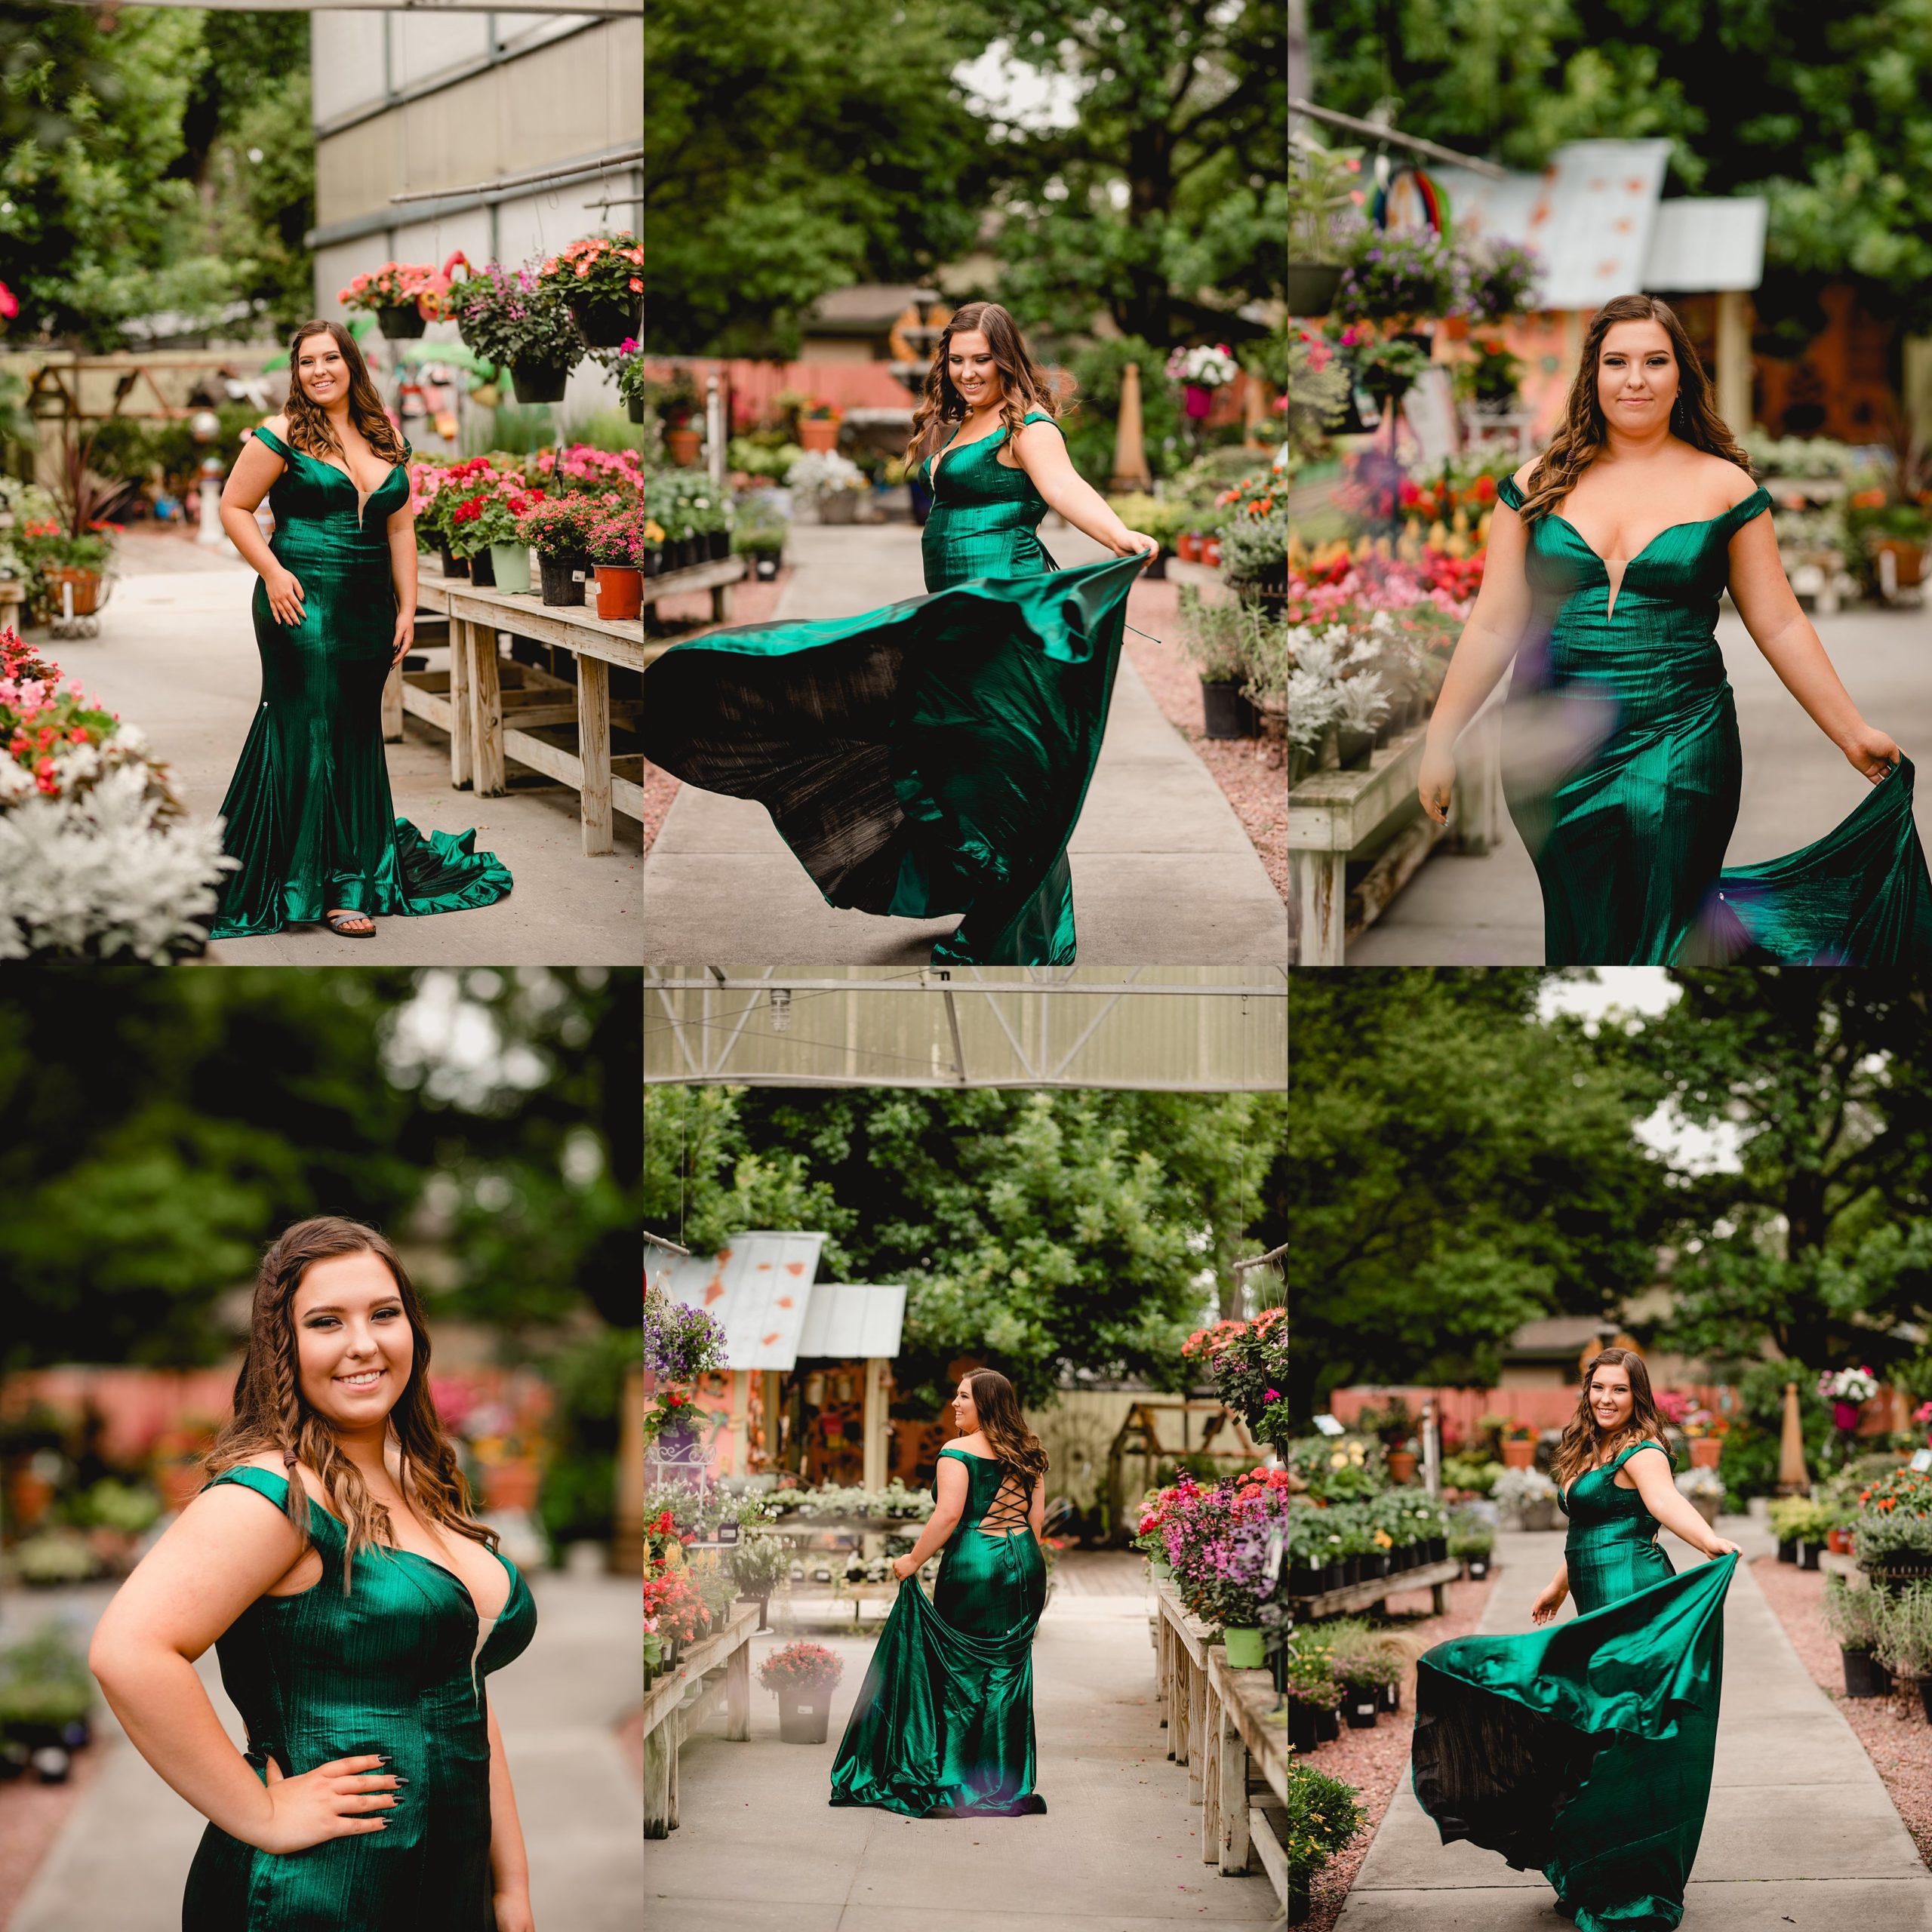 Prom posing and location ideas for green dresses